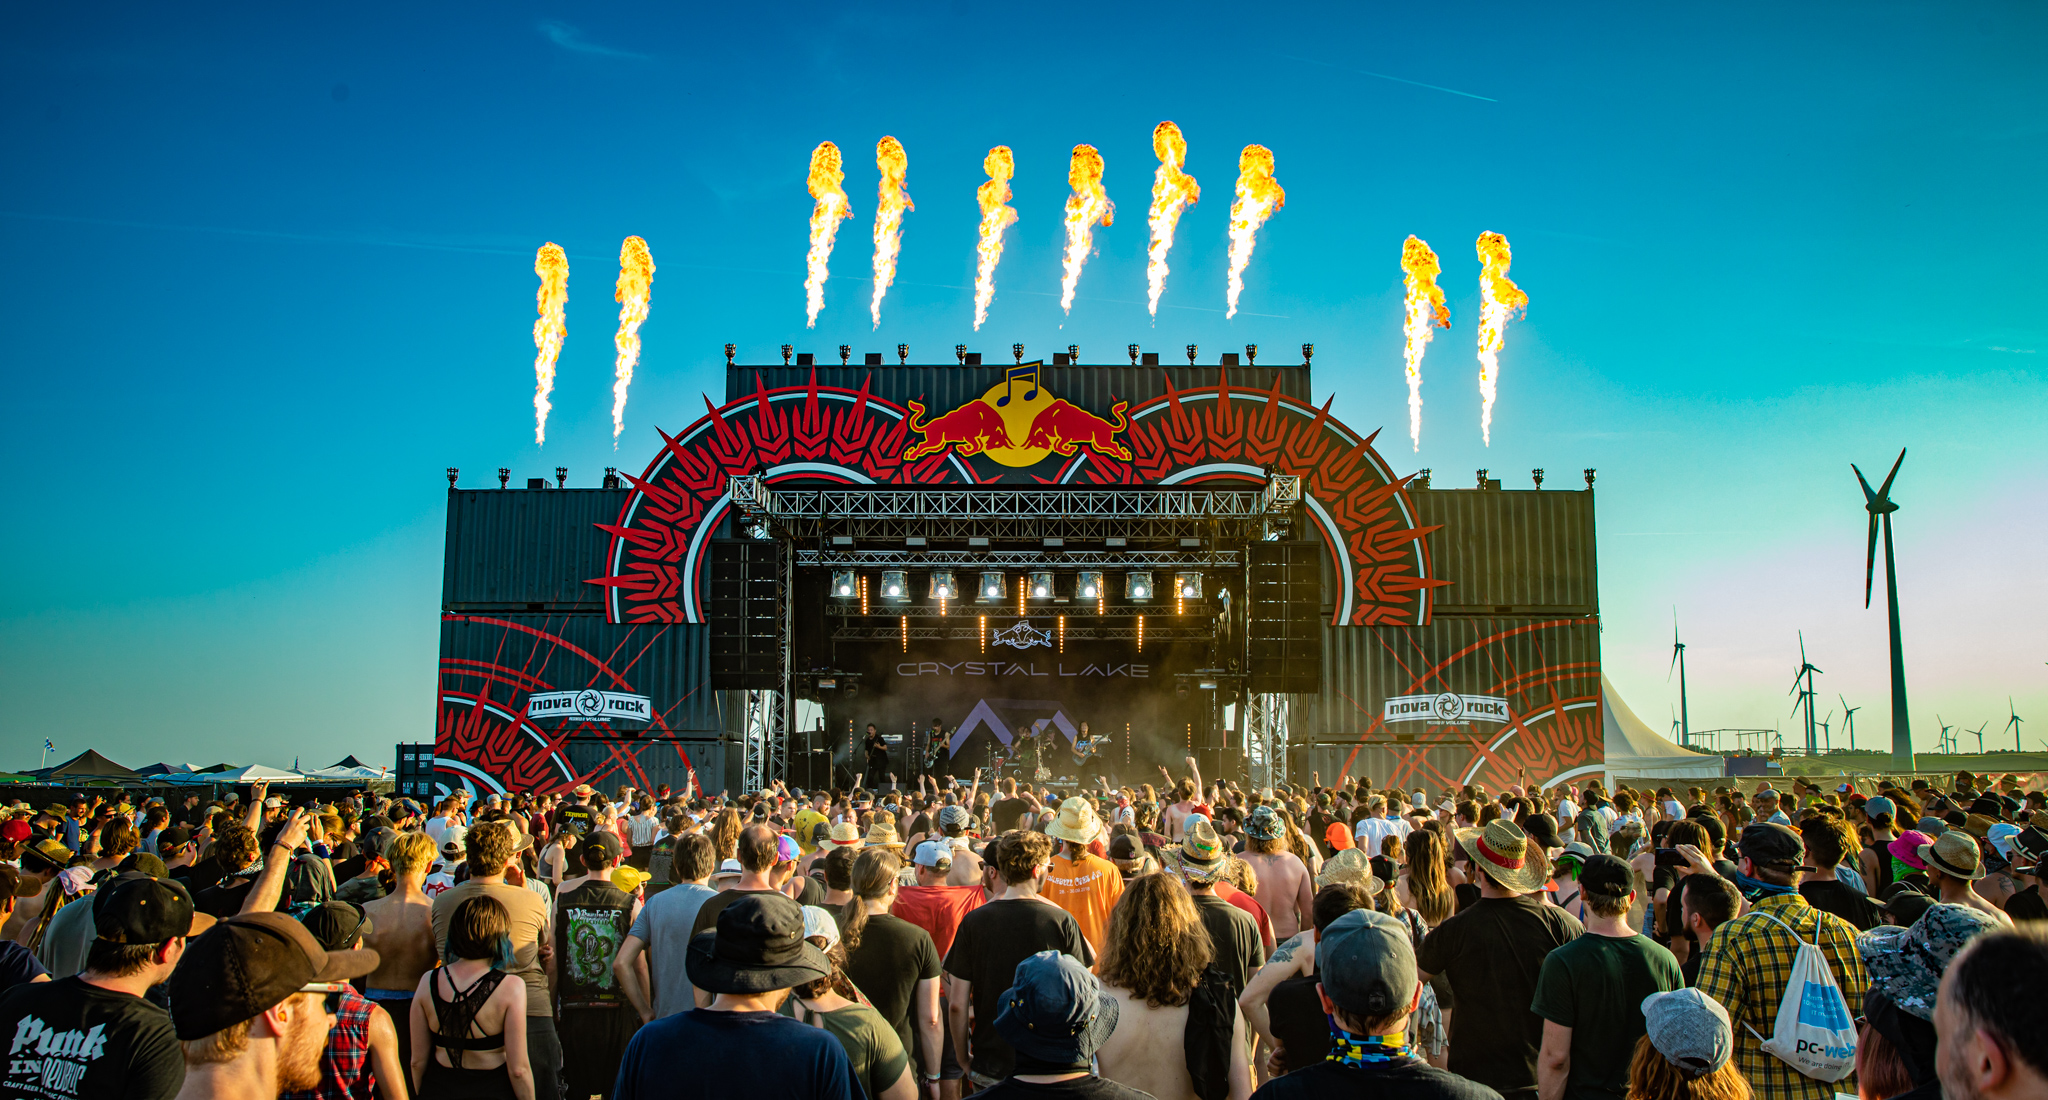 Nova Rock Red Bull Stage Line-Up - Musicnews 27.01.2020 · Volume.at